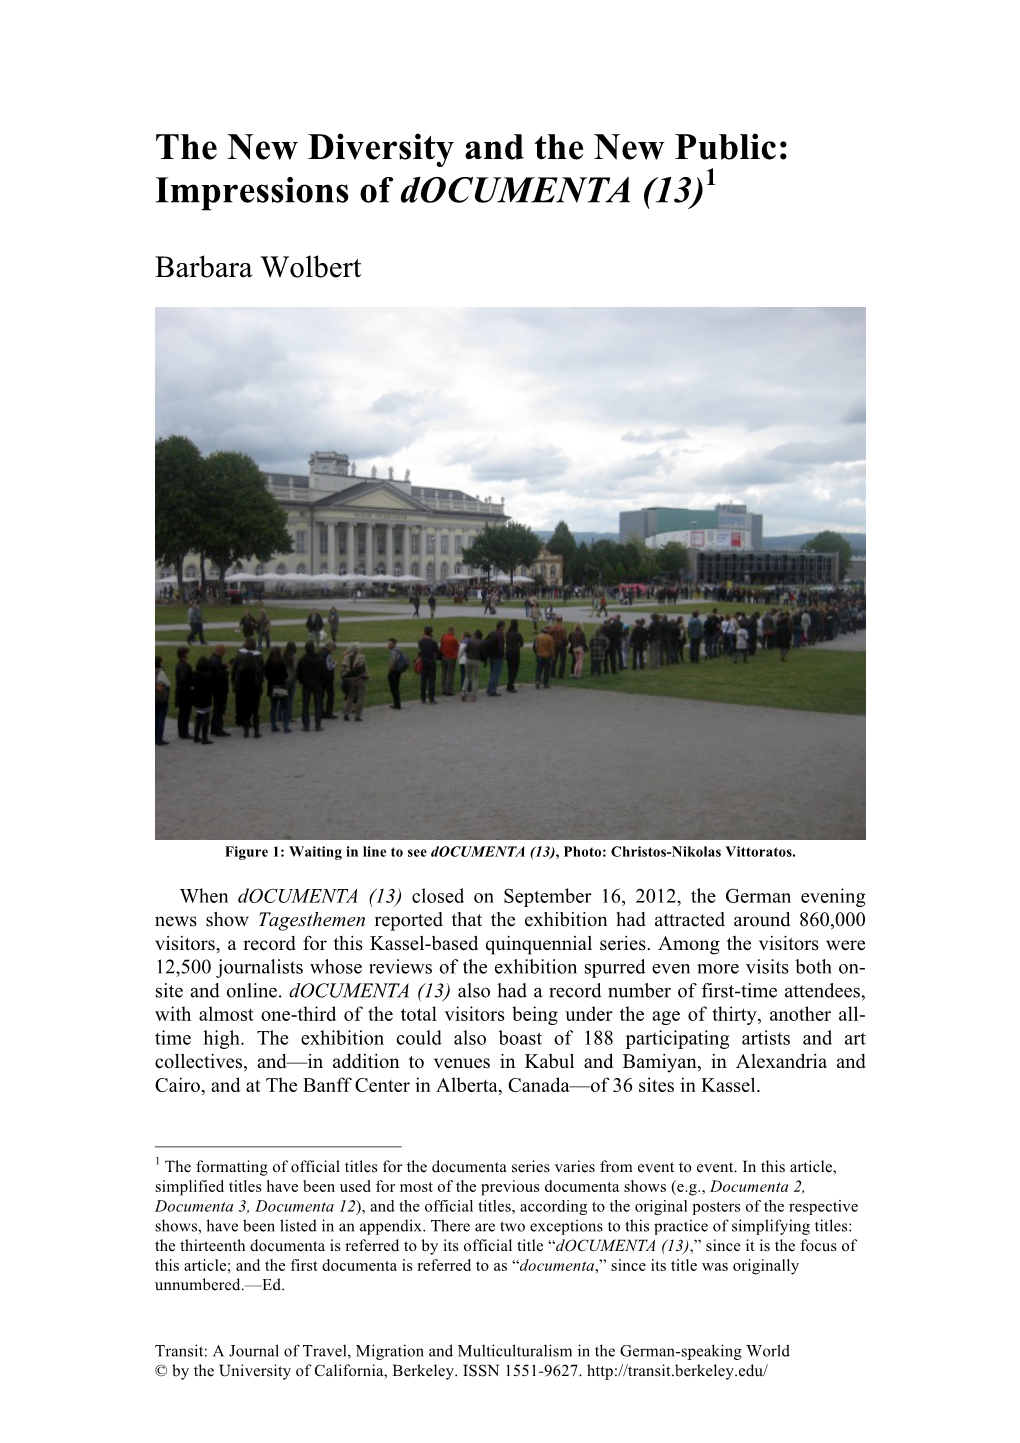 The New Diversity and the New Public: Impressions of Documenta (13)1